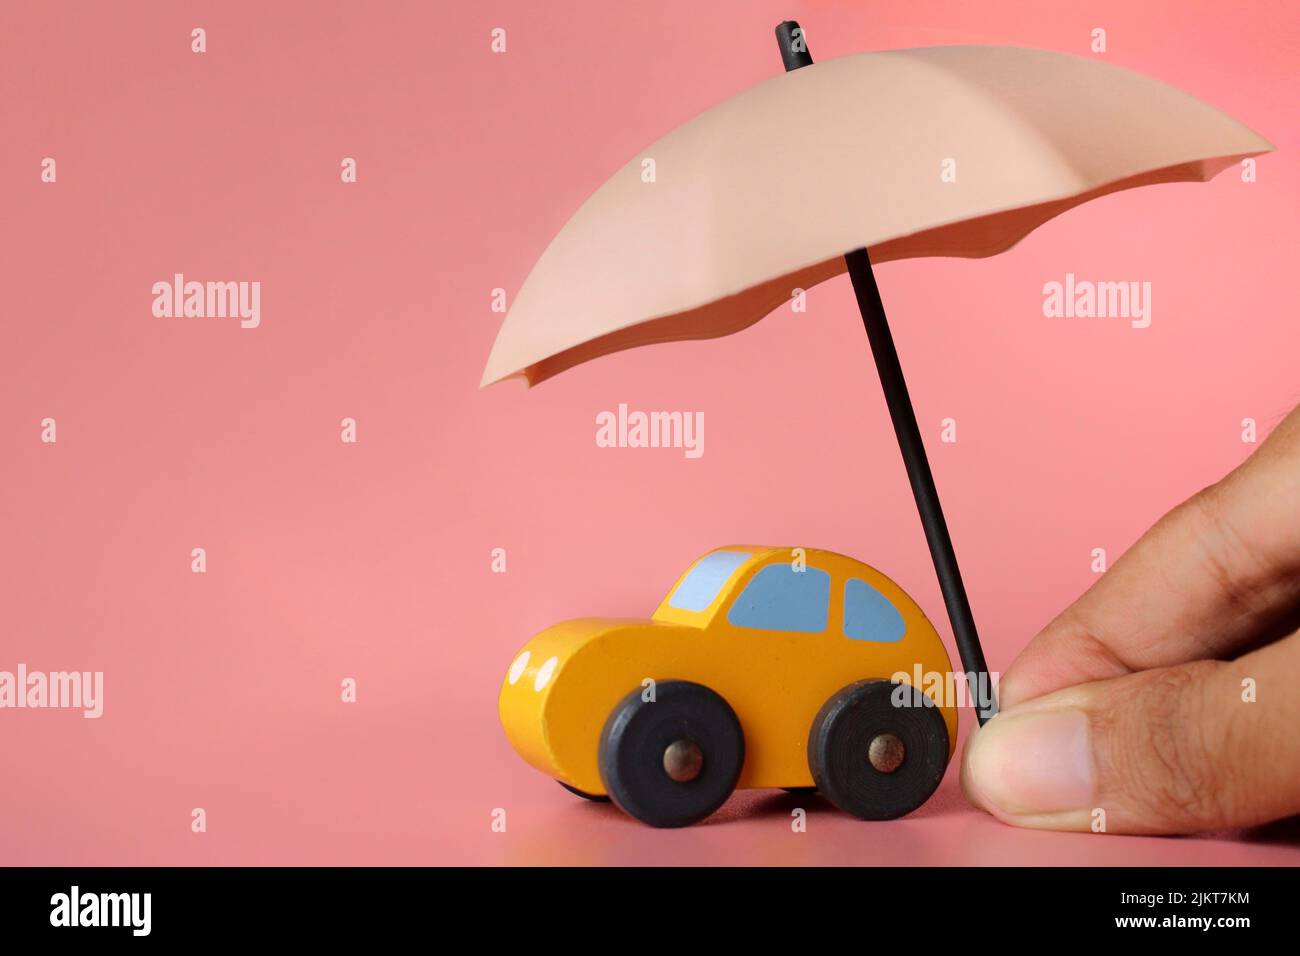 Umbrella and toy car with copy space. Car protection and insurance concept. Stock Photo